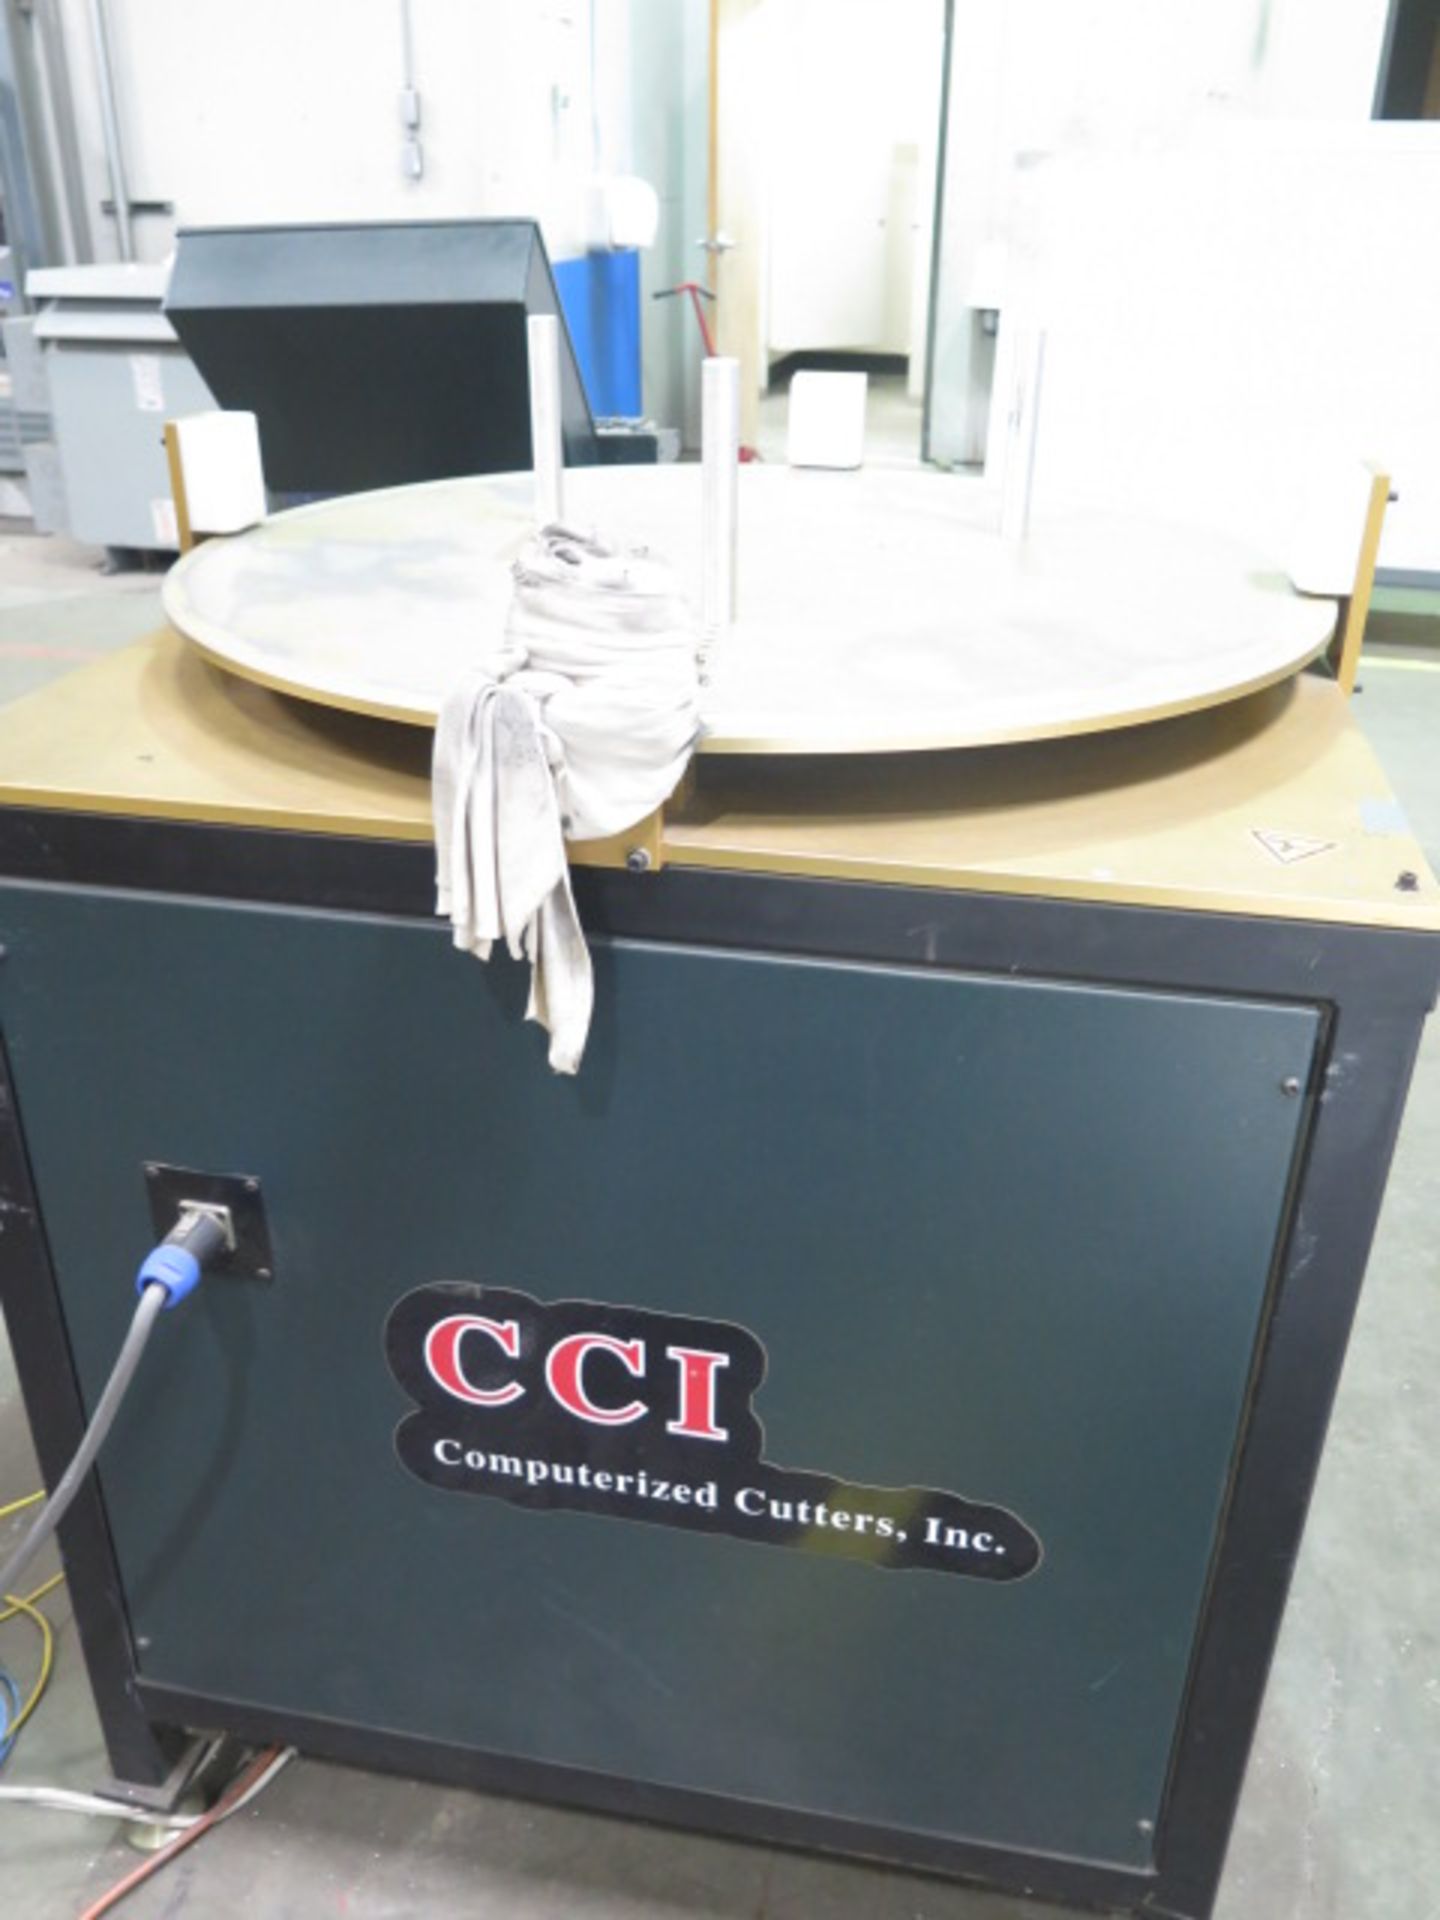 2008 Computerized Cutters, Inc. “ACCU-BEND” mdl. 410 Automated Letter Bender s/n 0107-582-0308K w/ - Image 10 of 22